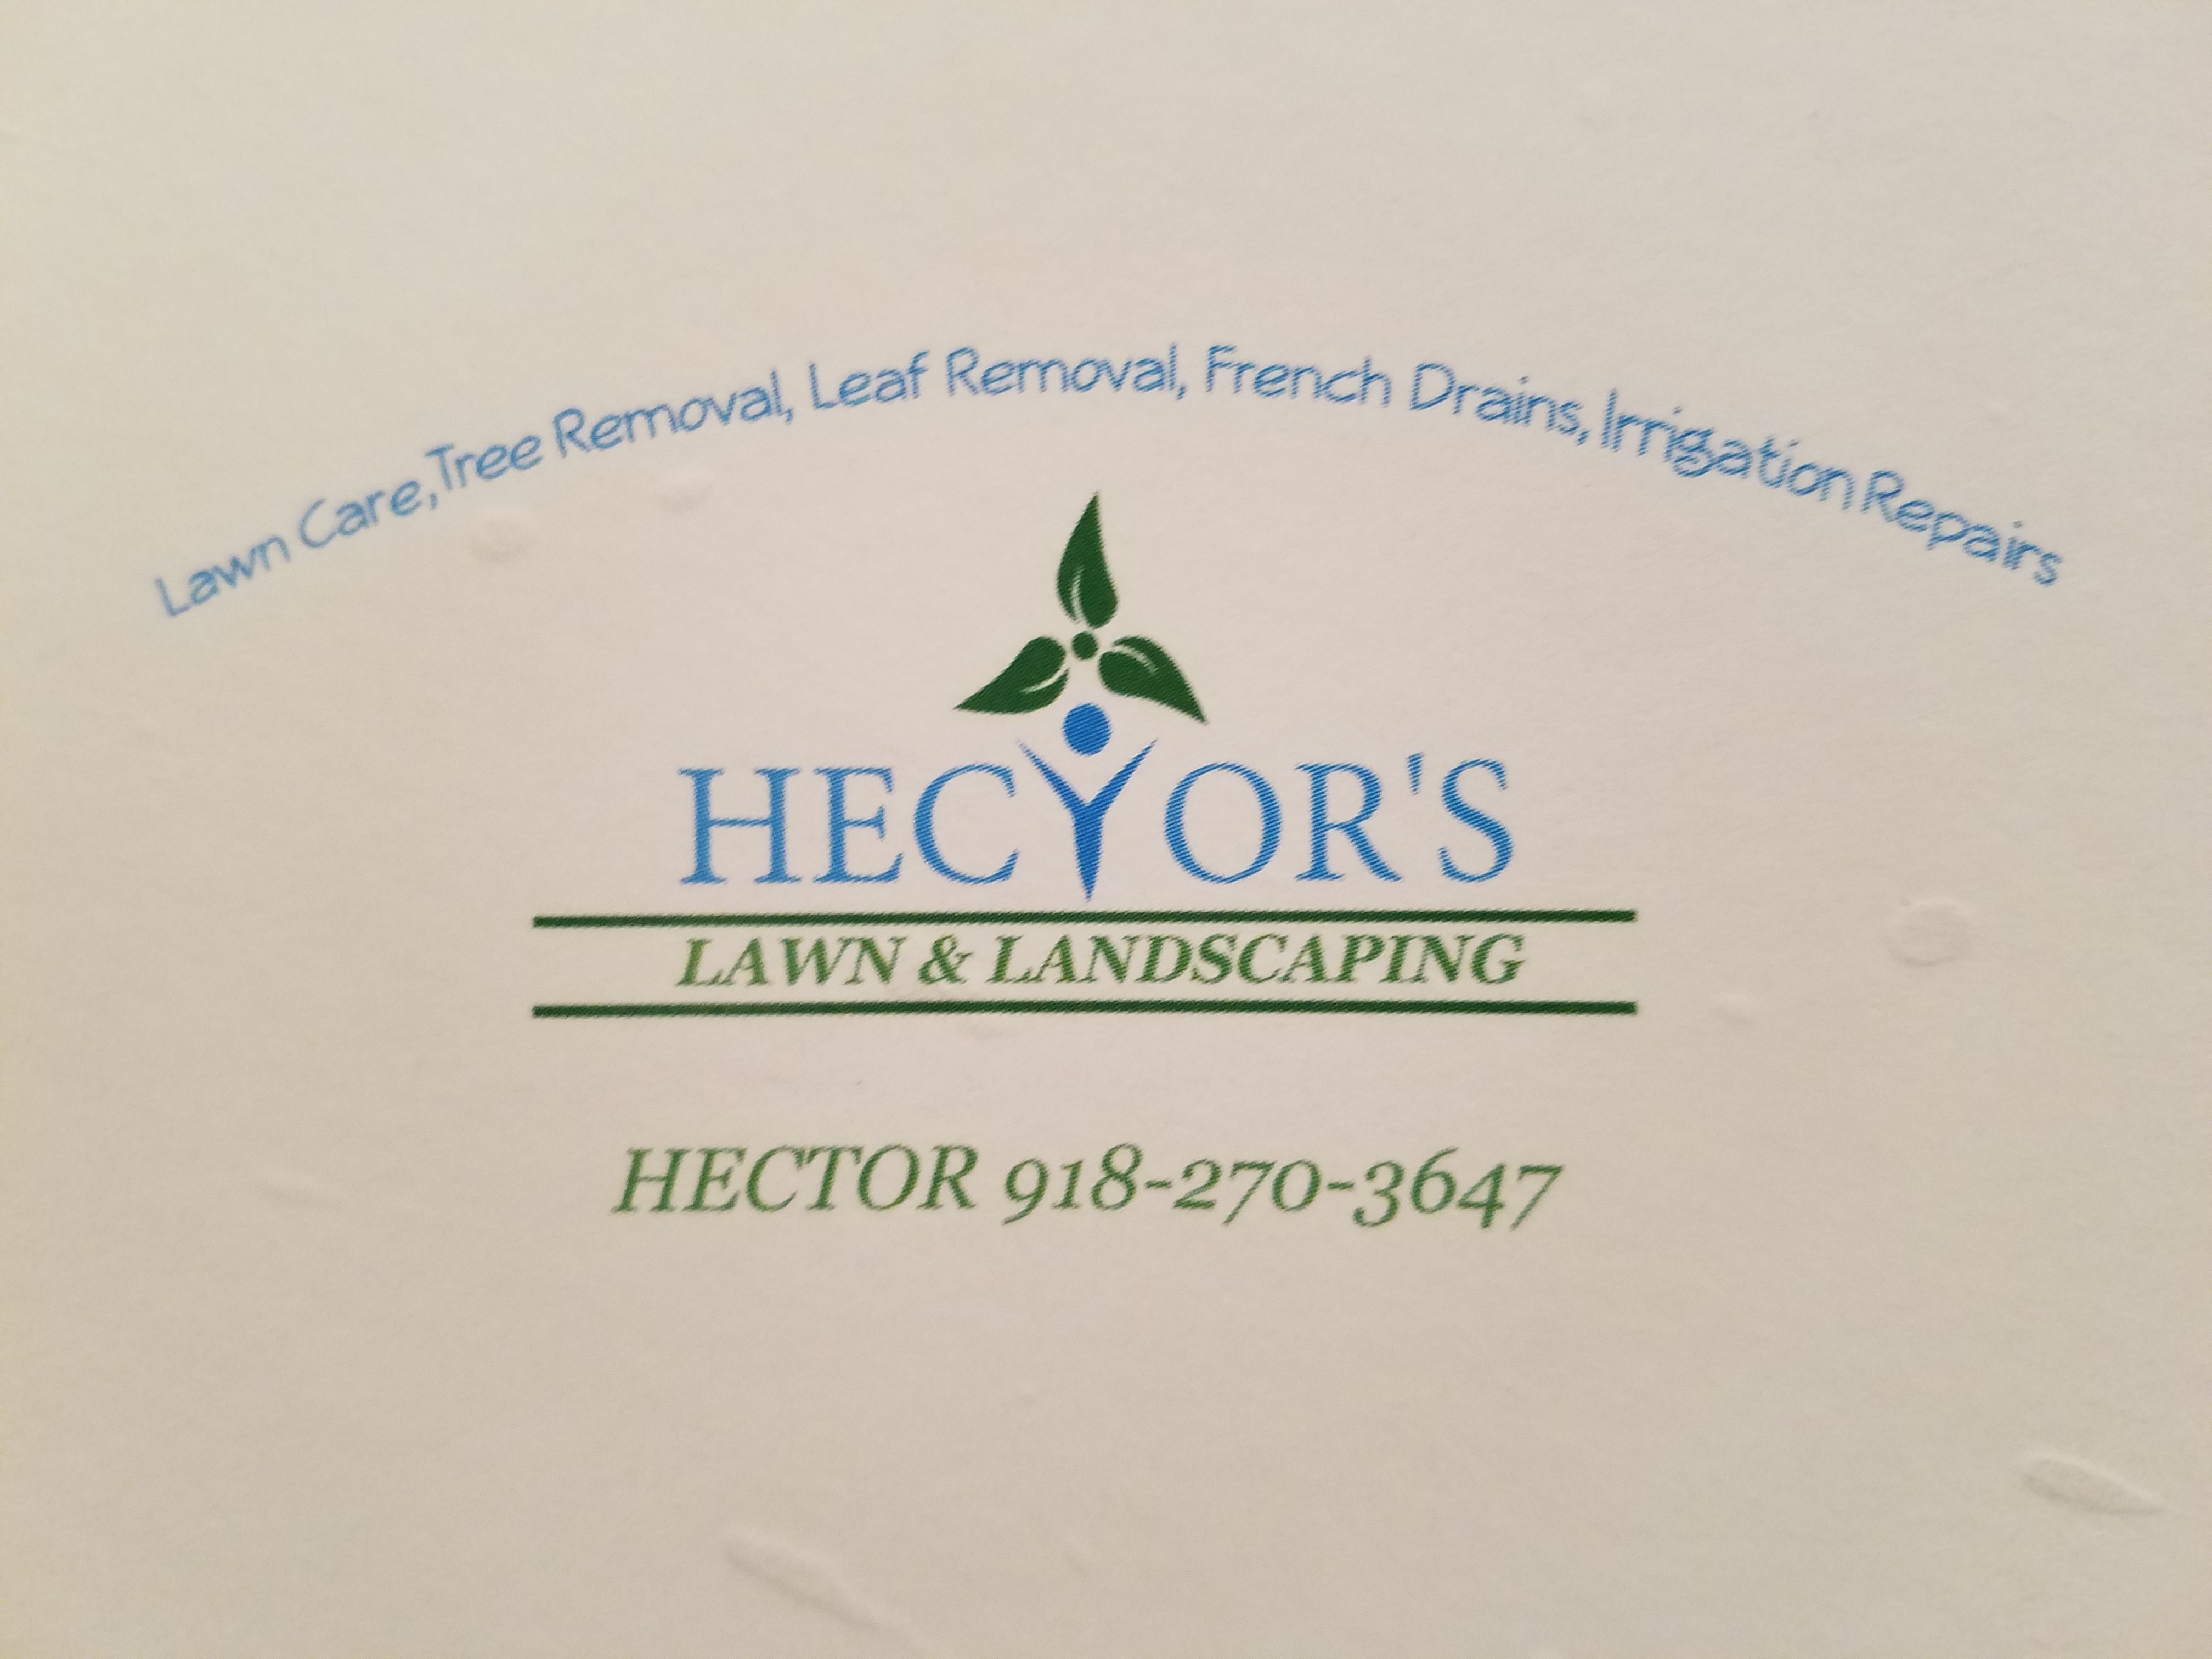 Hector's Lawn & Landscaping & Construction Logo